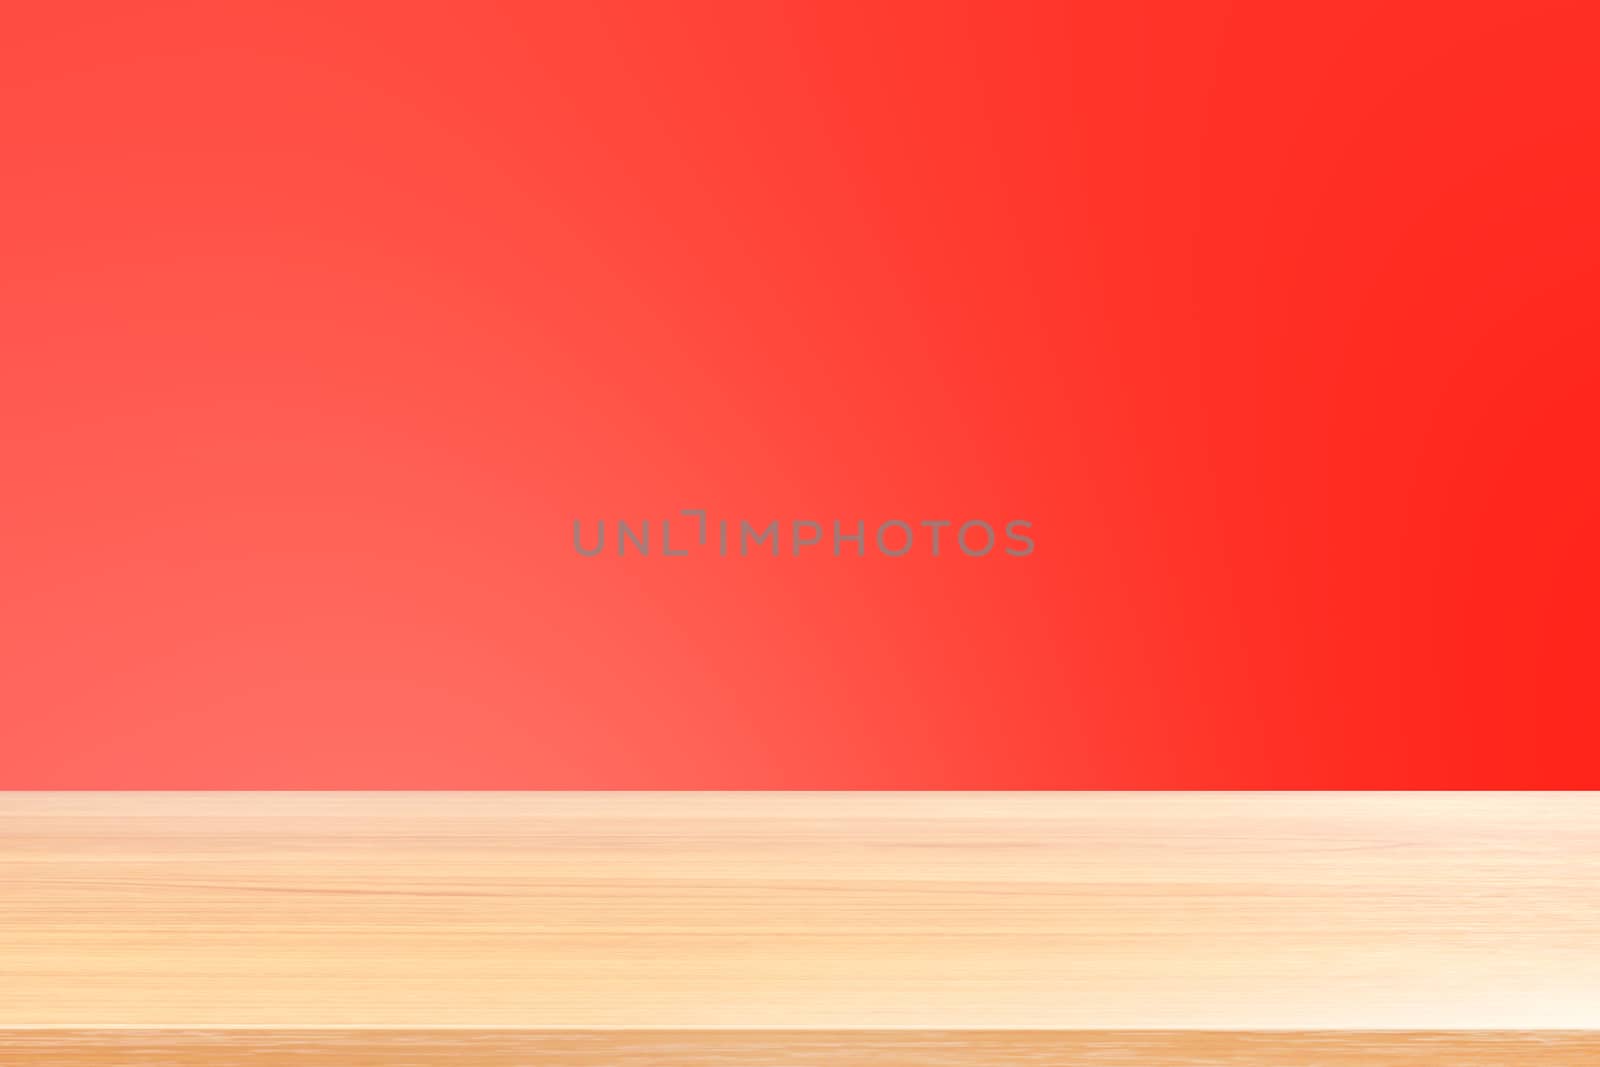 empty wood table floors on gradient red soft background, wood table board empty front colorful gradient red, wooden plank blank on light red gradient for display products or banner advertising